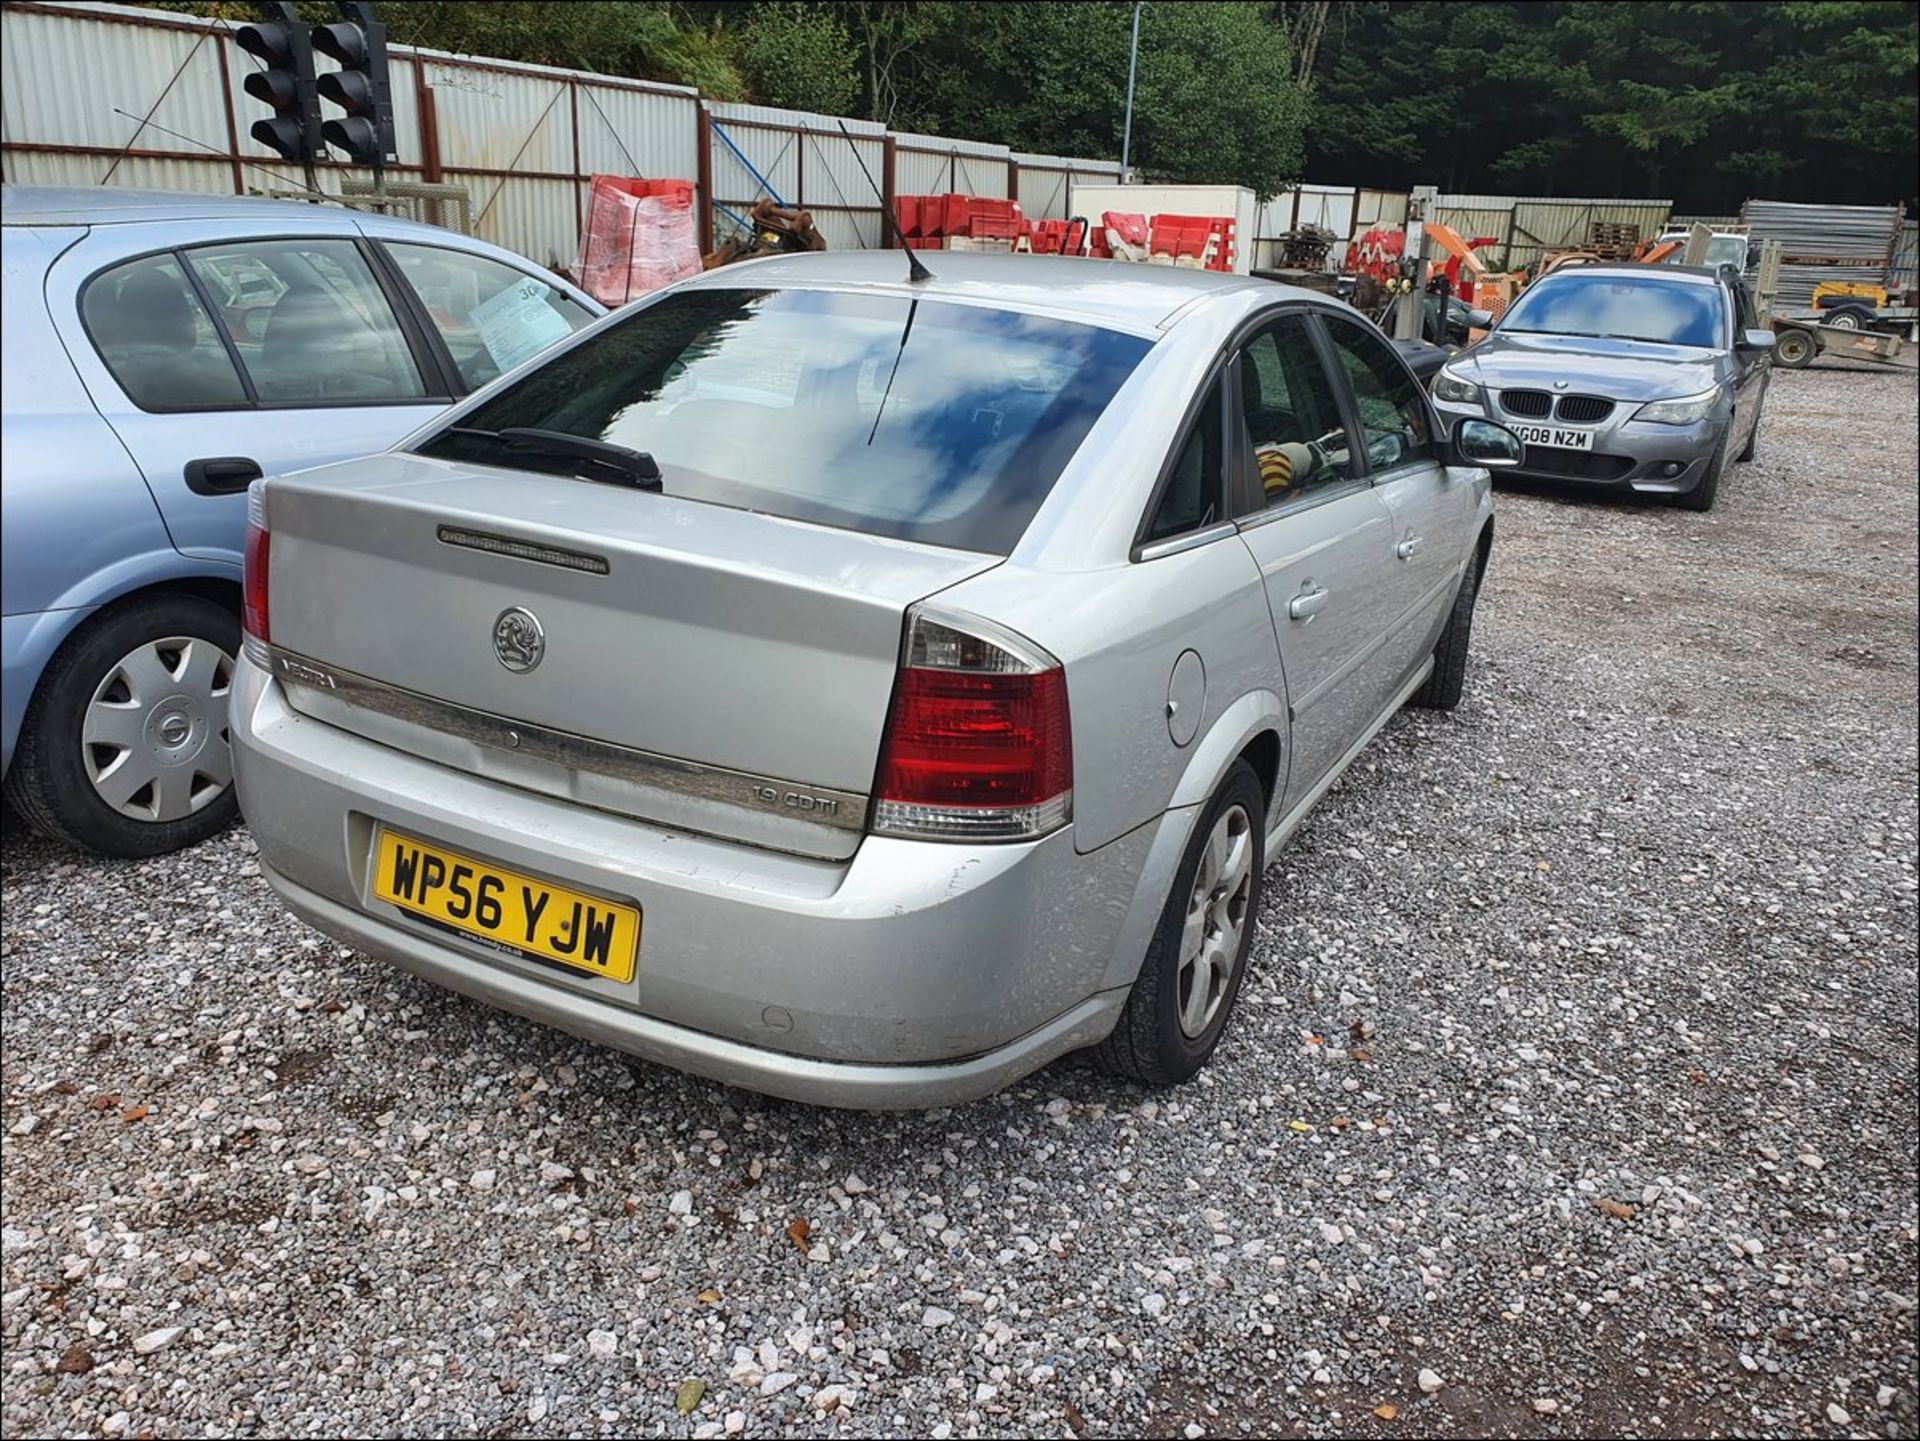 07/56 VAUXHALL VECTRA EXCLUSIV CDTI 120 - 1910cc 5dr Hatchback (Silver, 160k) - Image 7 of 8